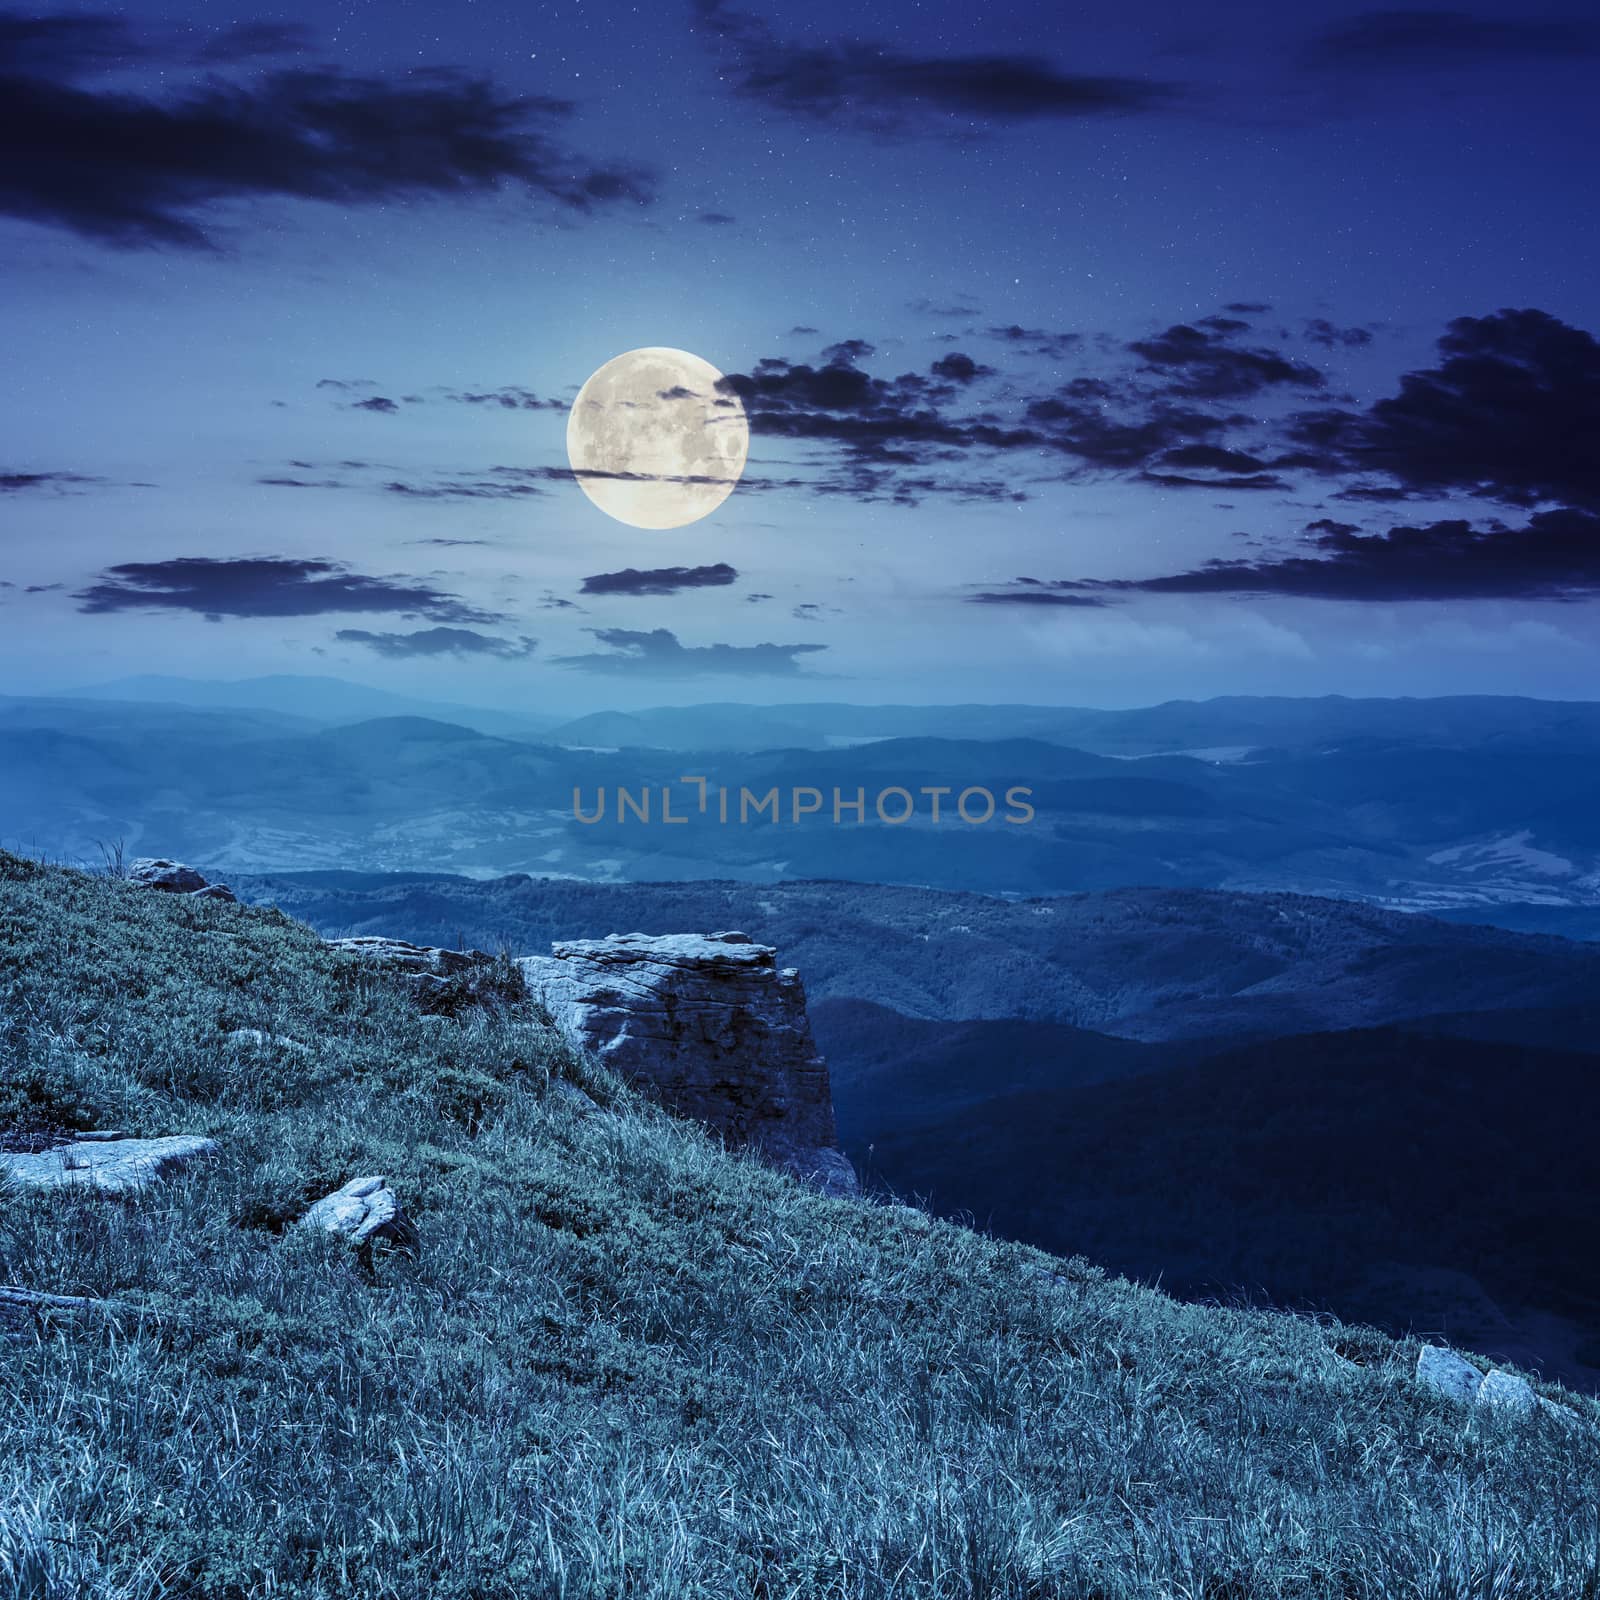 view on high mountains from hillside covered with grass with few stones on the edge at night in full moon light